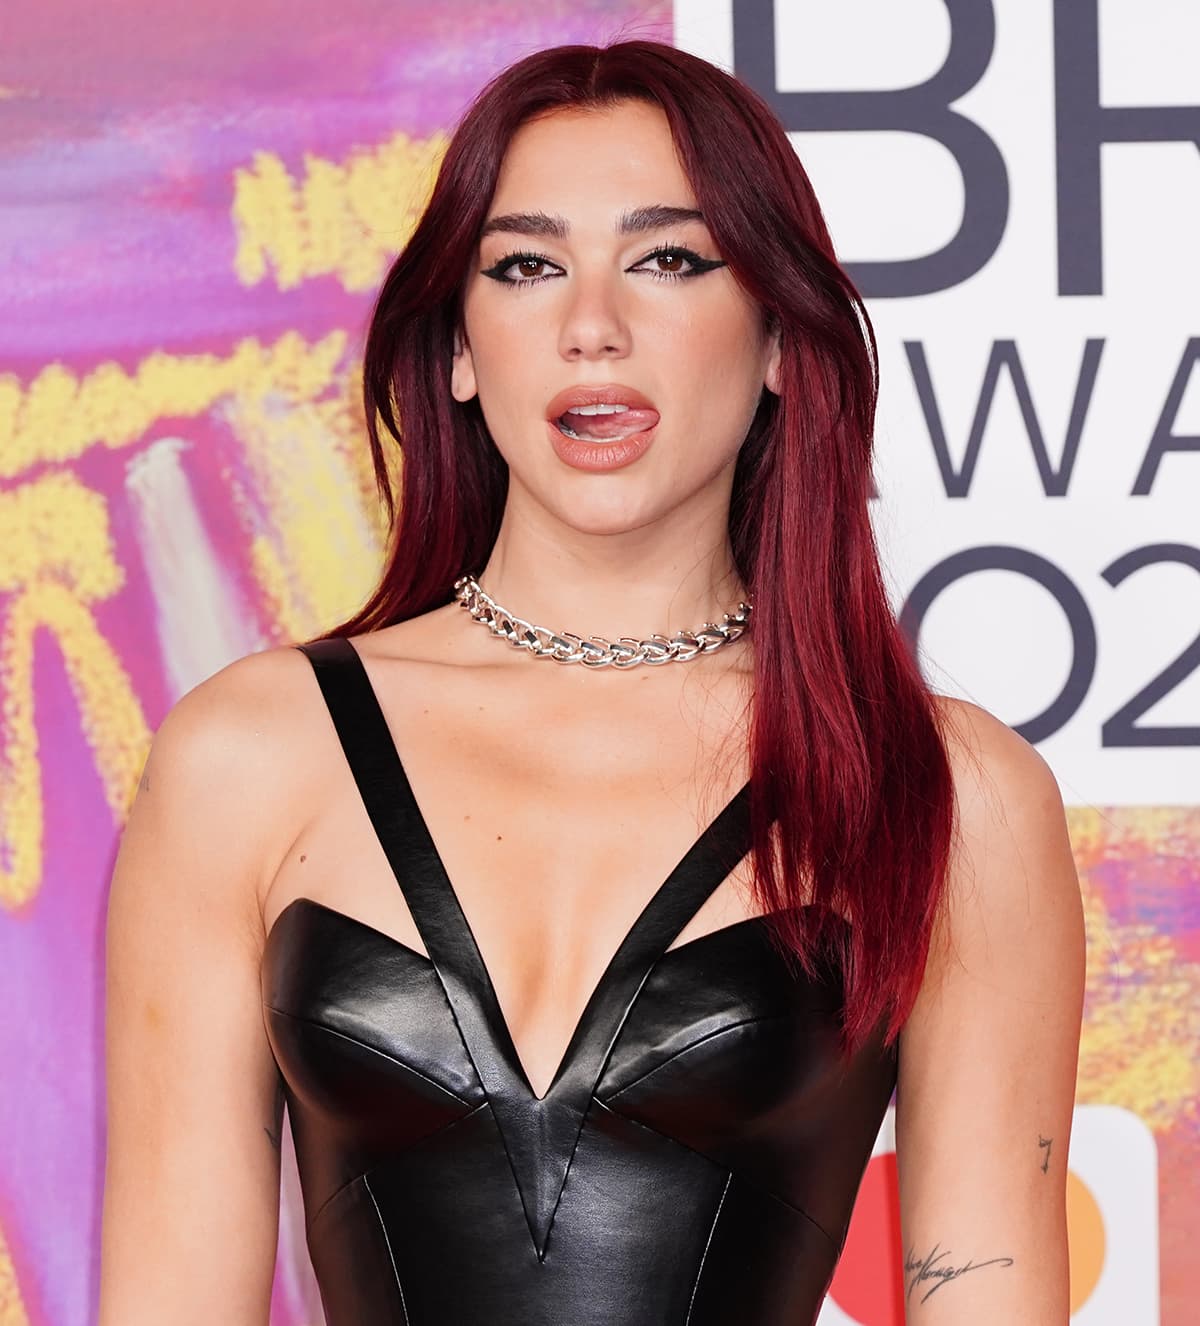 Dua Lipa wears Cleopatra-inspired eyeliner with nude lips and styles her burgundy hair down cascading over her shoulder